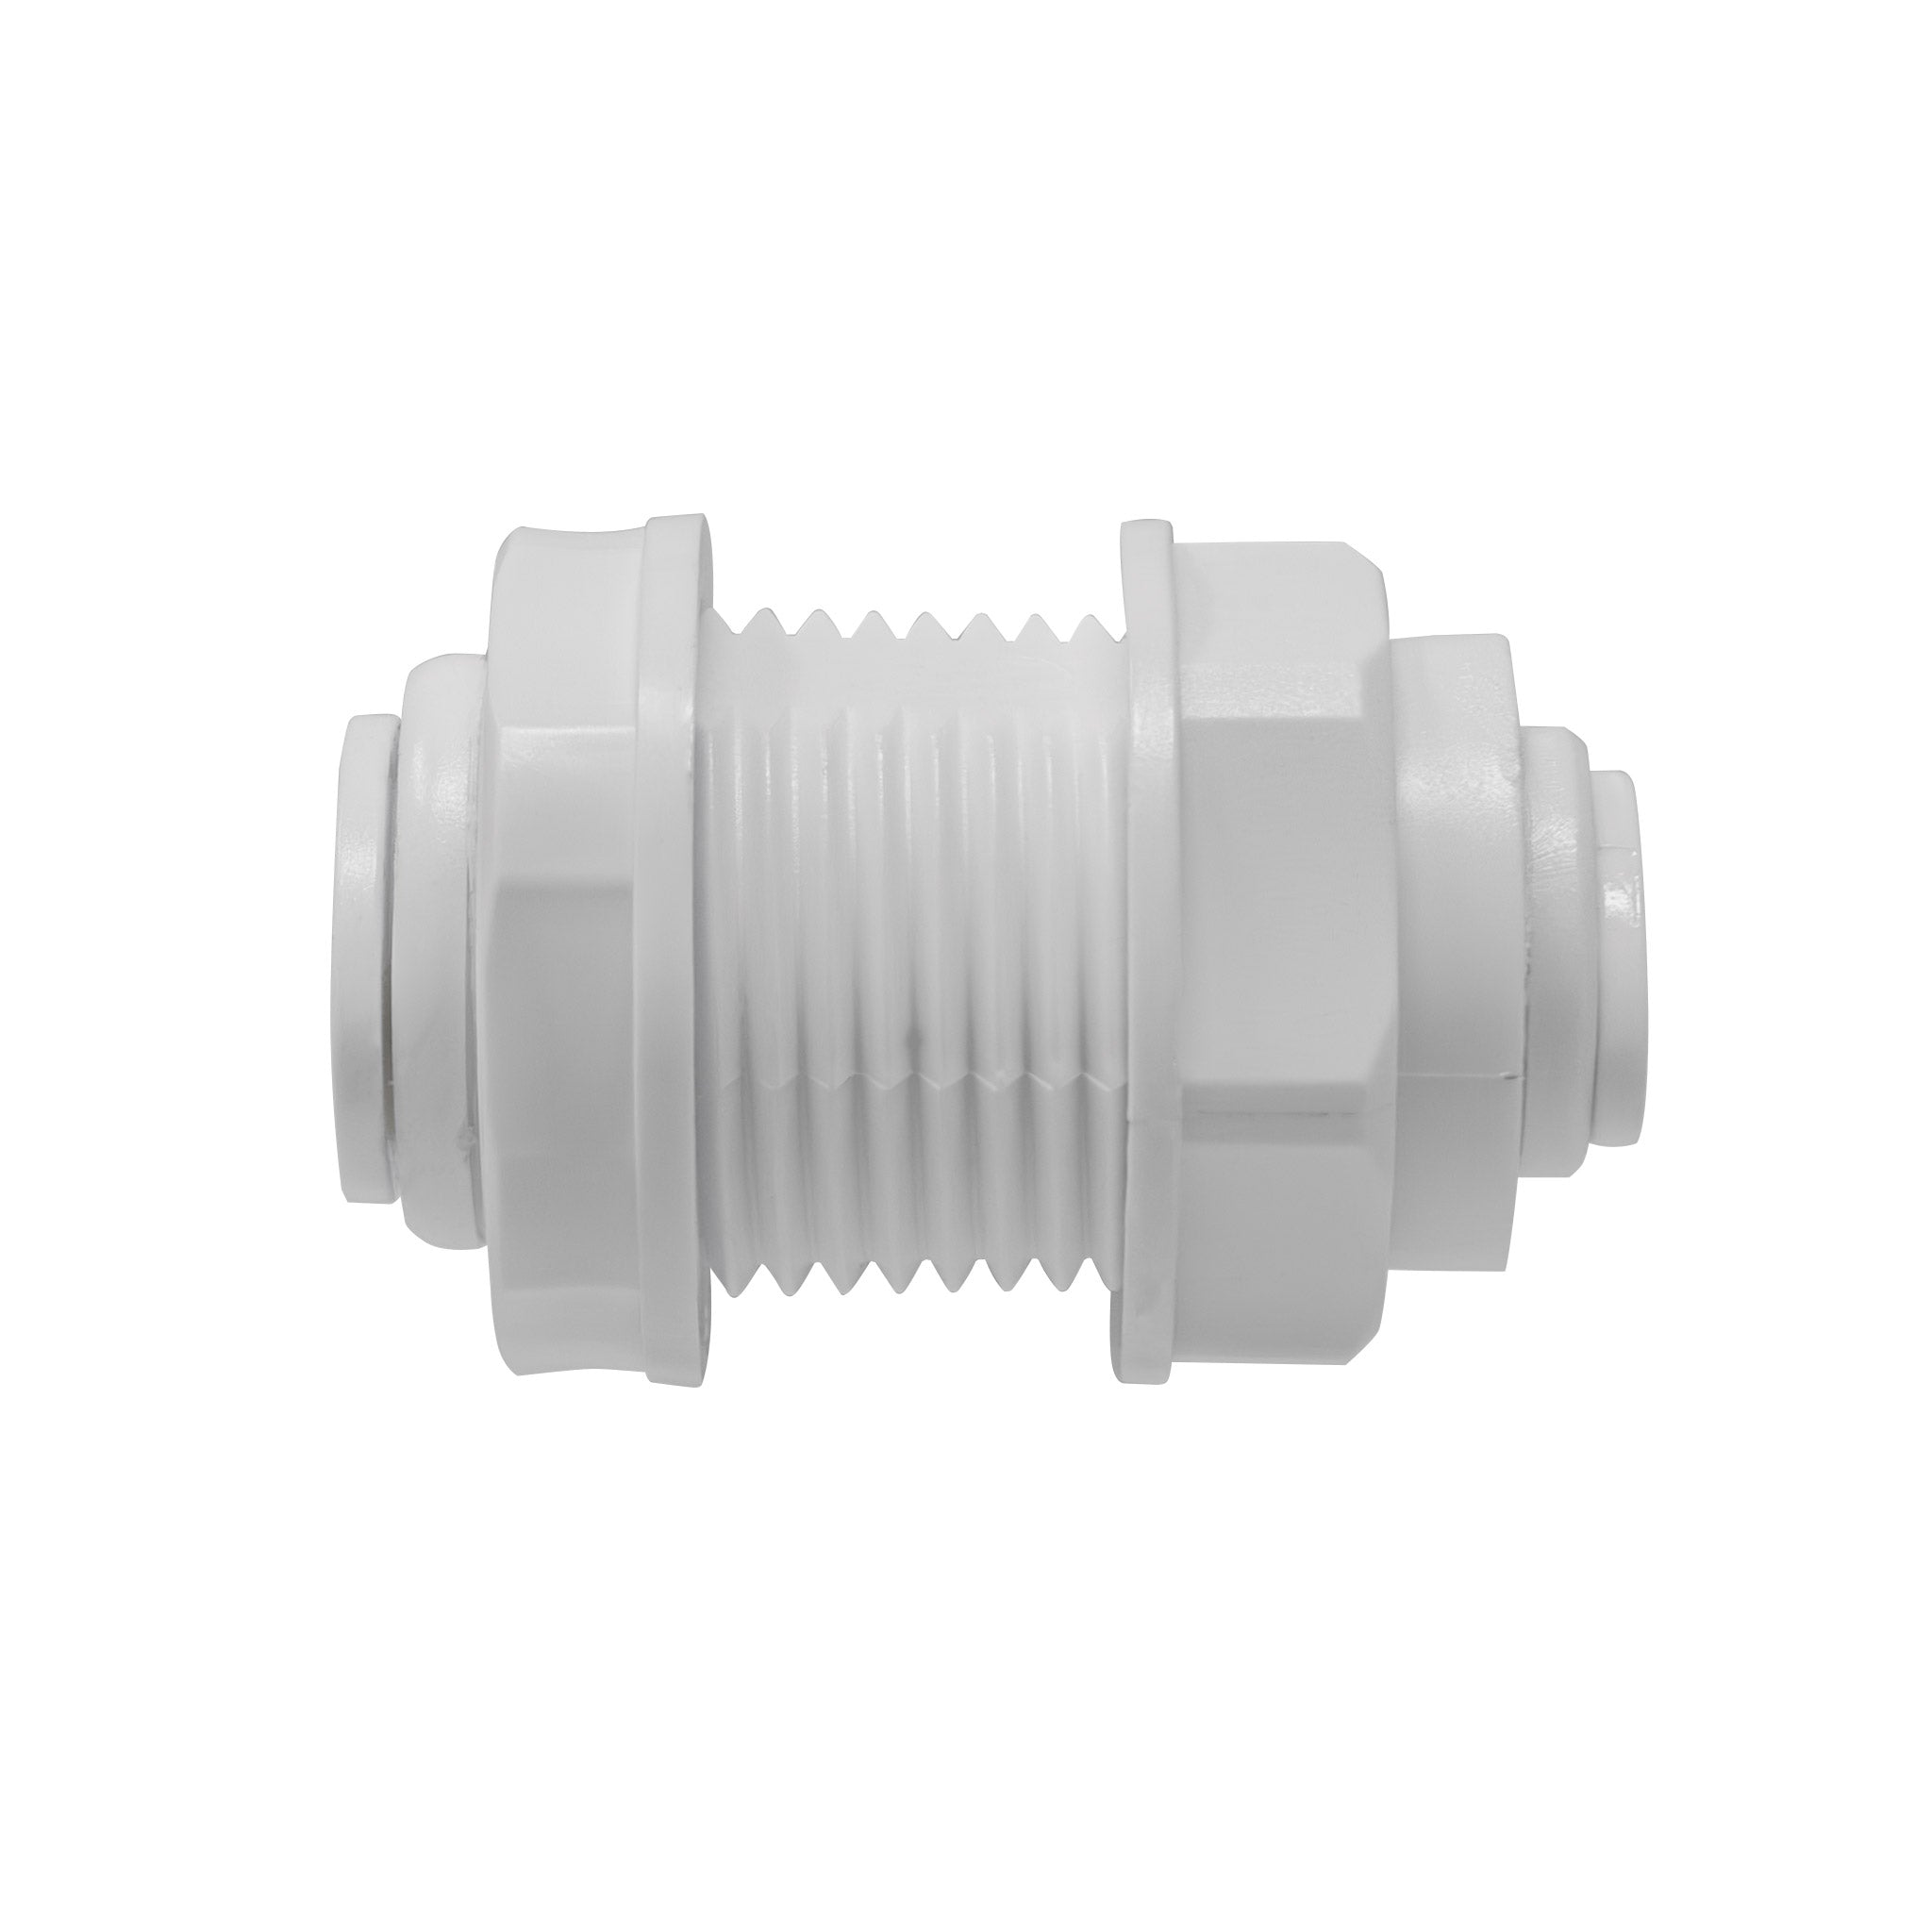 Quick connect bulkhead union. 1/4" quick connect x 3/8" quick connect (nut end). Certified by NSF.